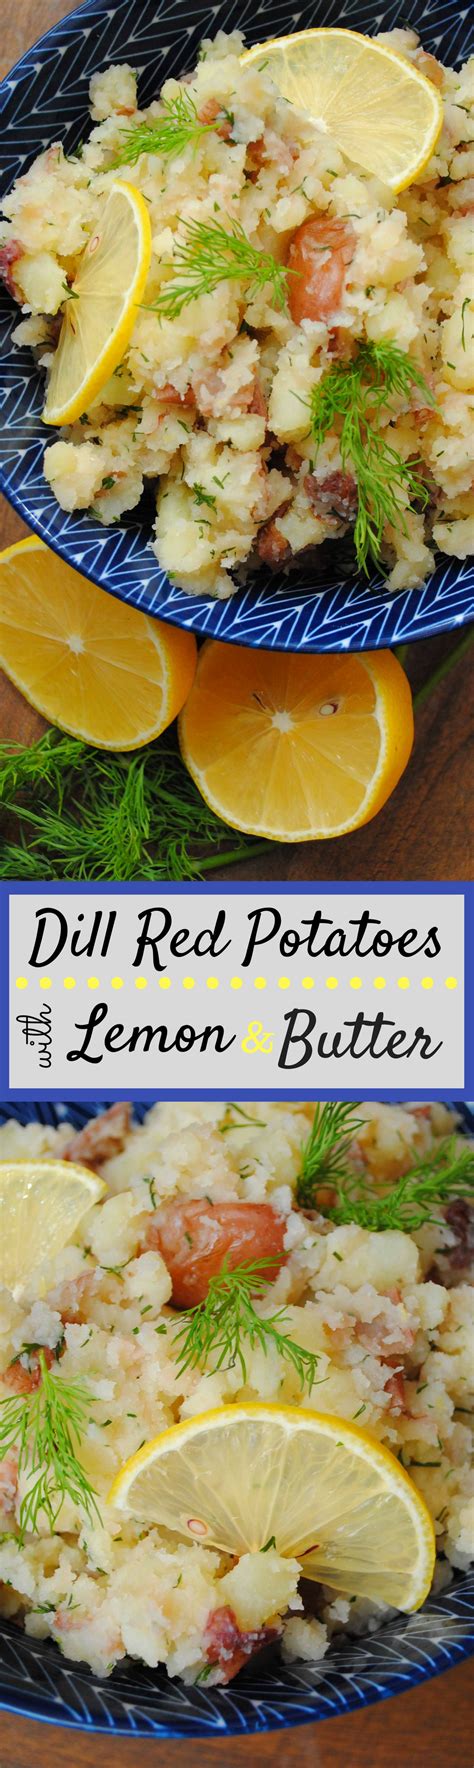 dill-red-potatoes-with-lemon-butter-the-anchored image